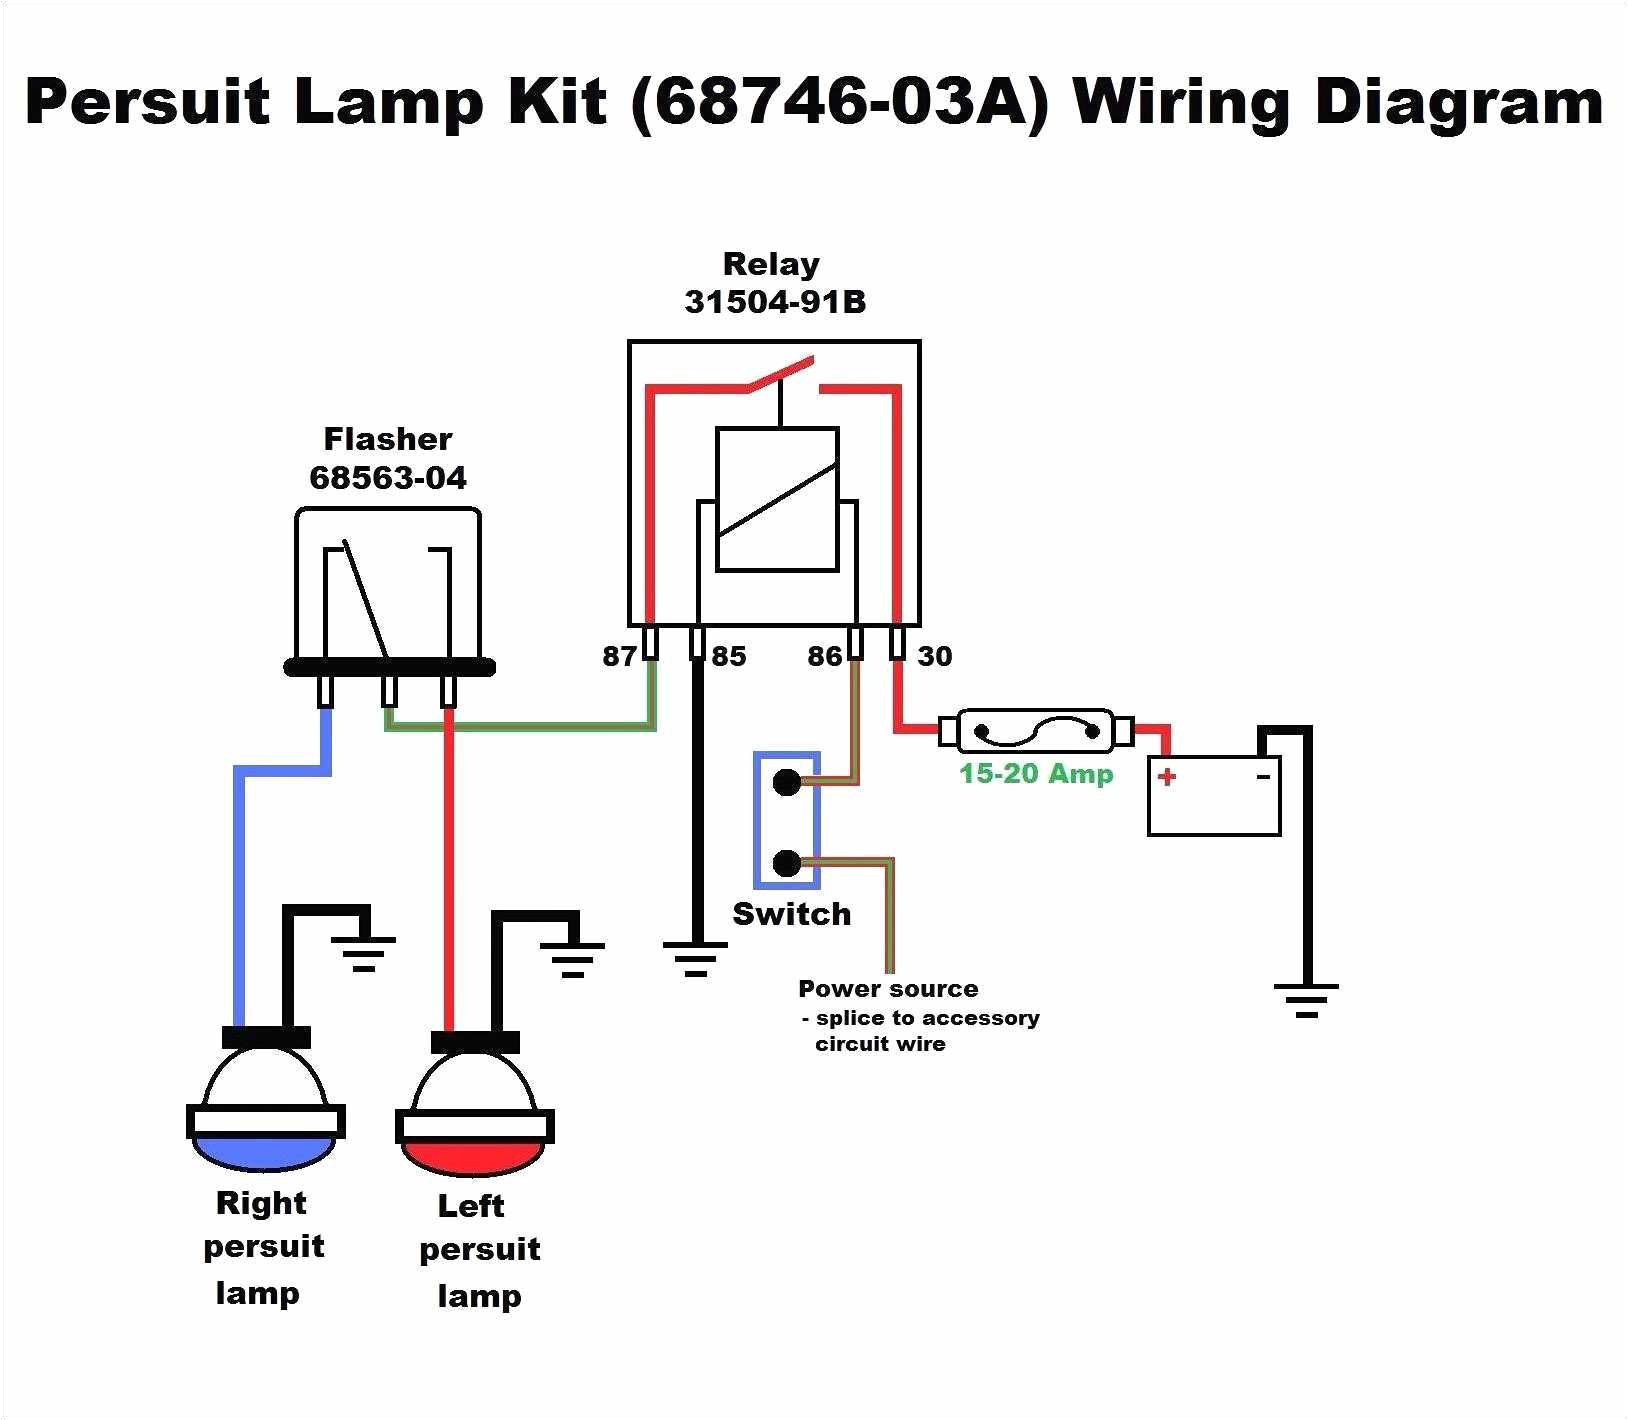 dimmer switch wiring diagram inspirational diagram website light rx lovely car stereo wiring diagrams 0d pics